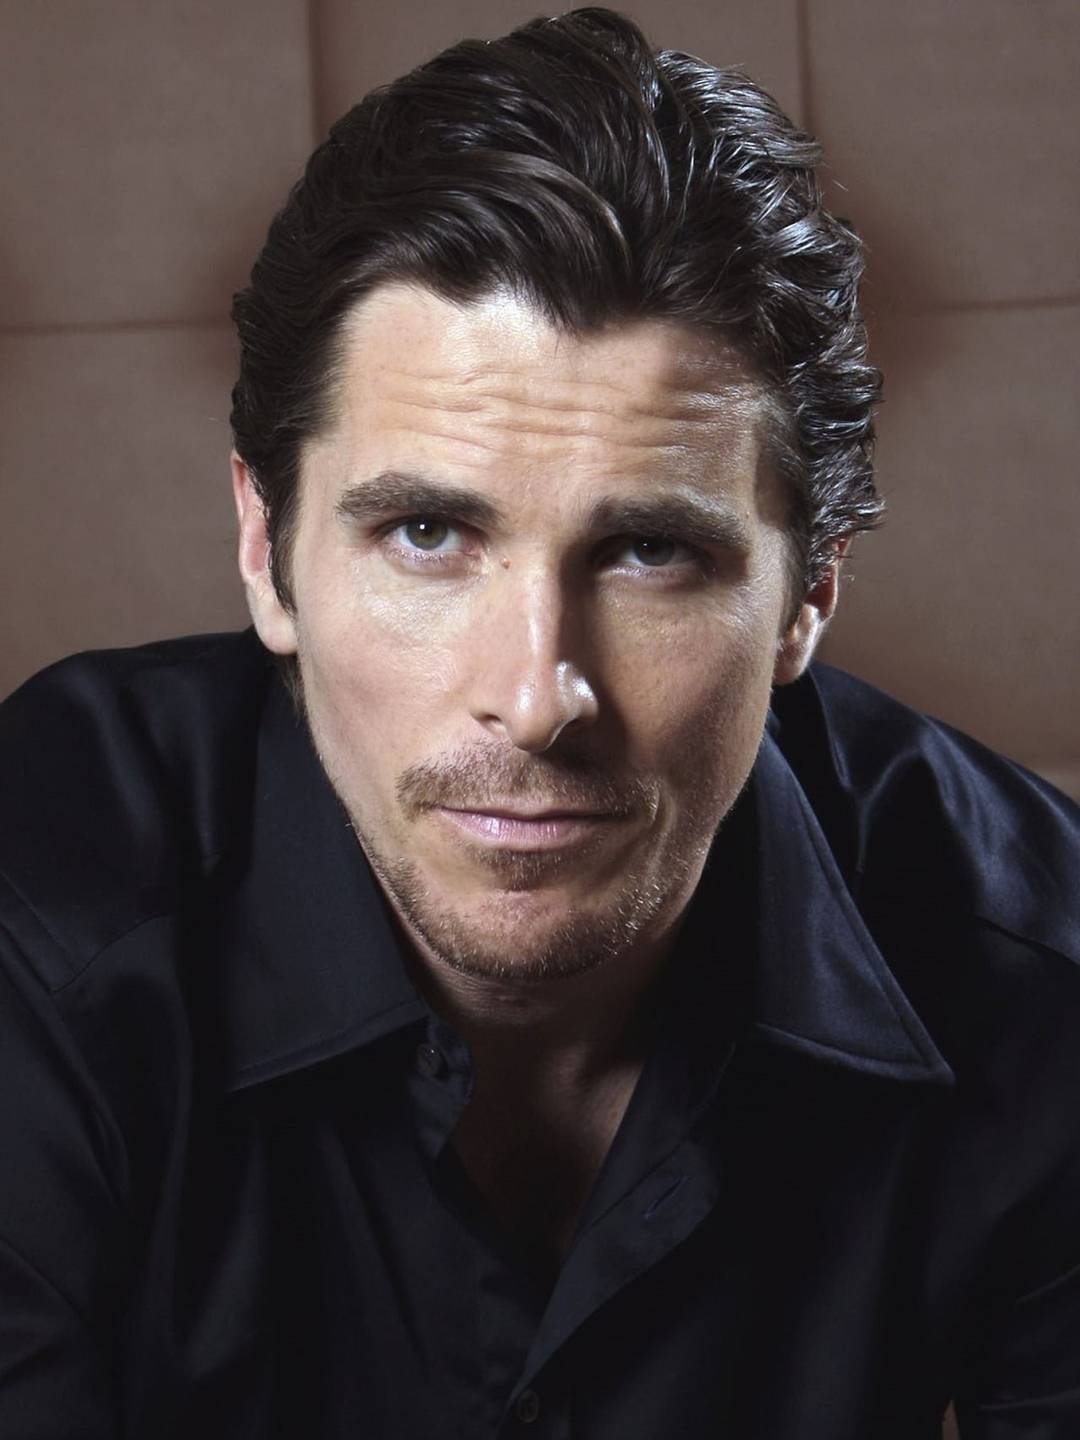 Christian Bale current look